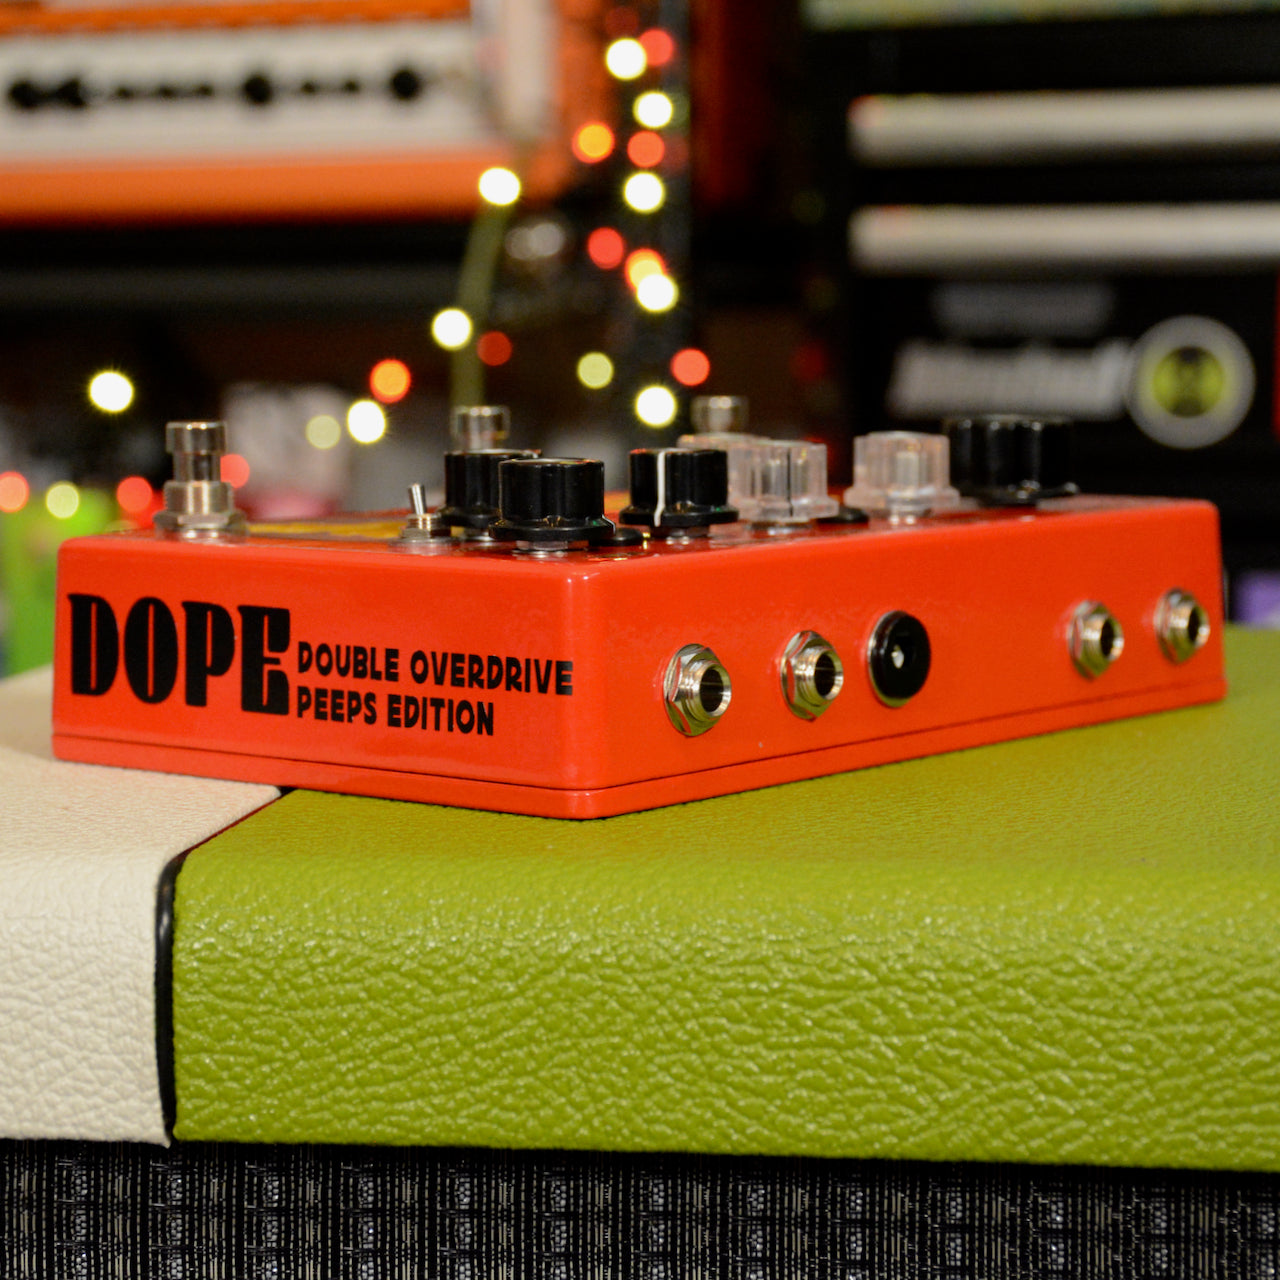 DOPE - Double Overdrive Peeps Edition